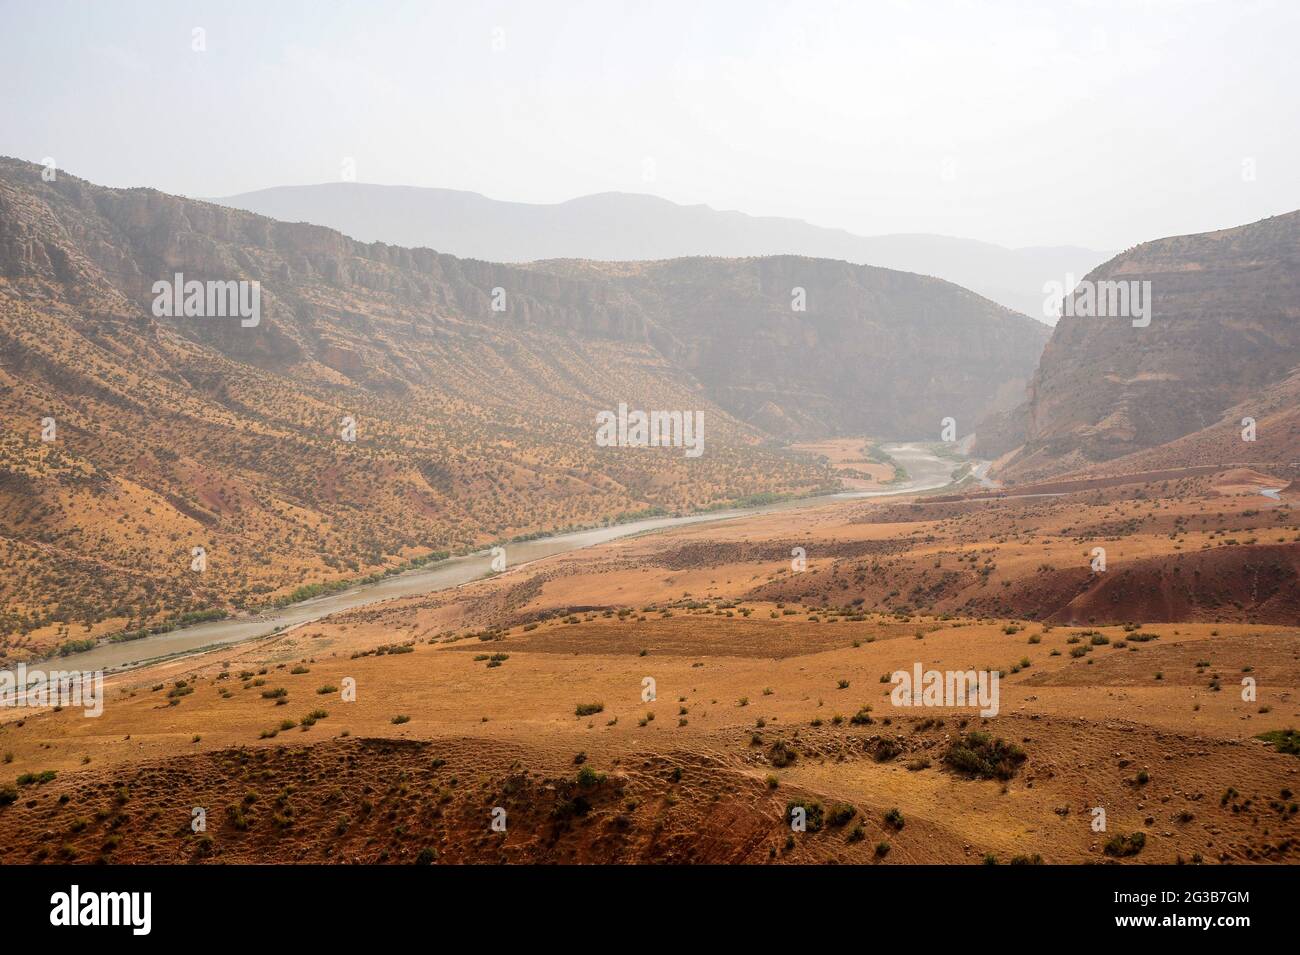 Botan valley view with river. Siirt province Stock Photo